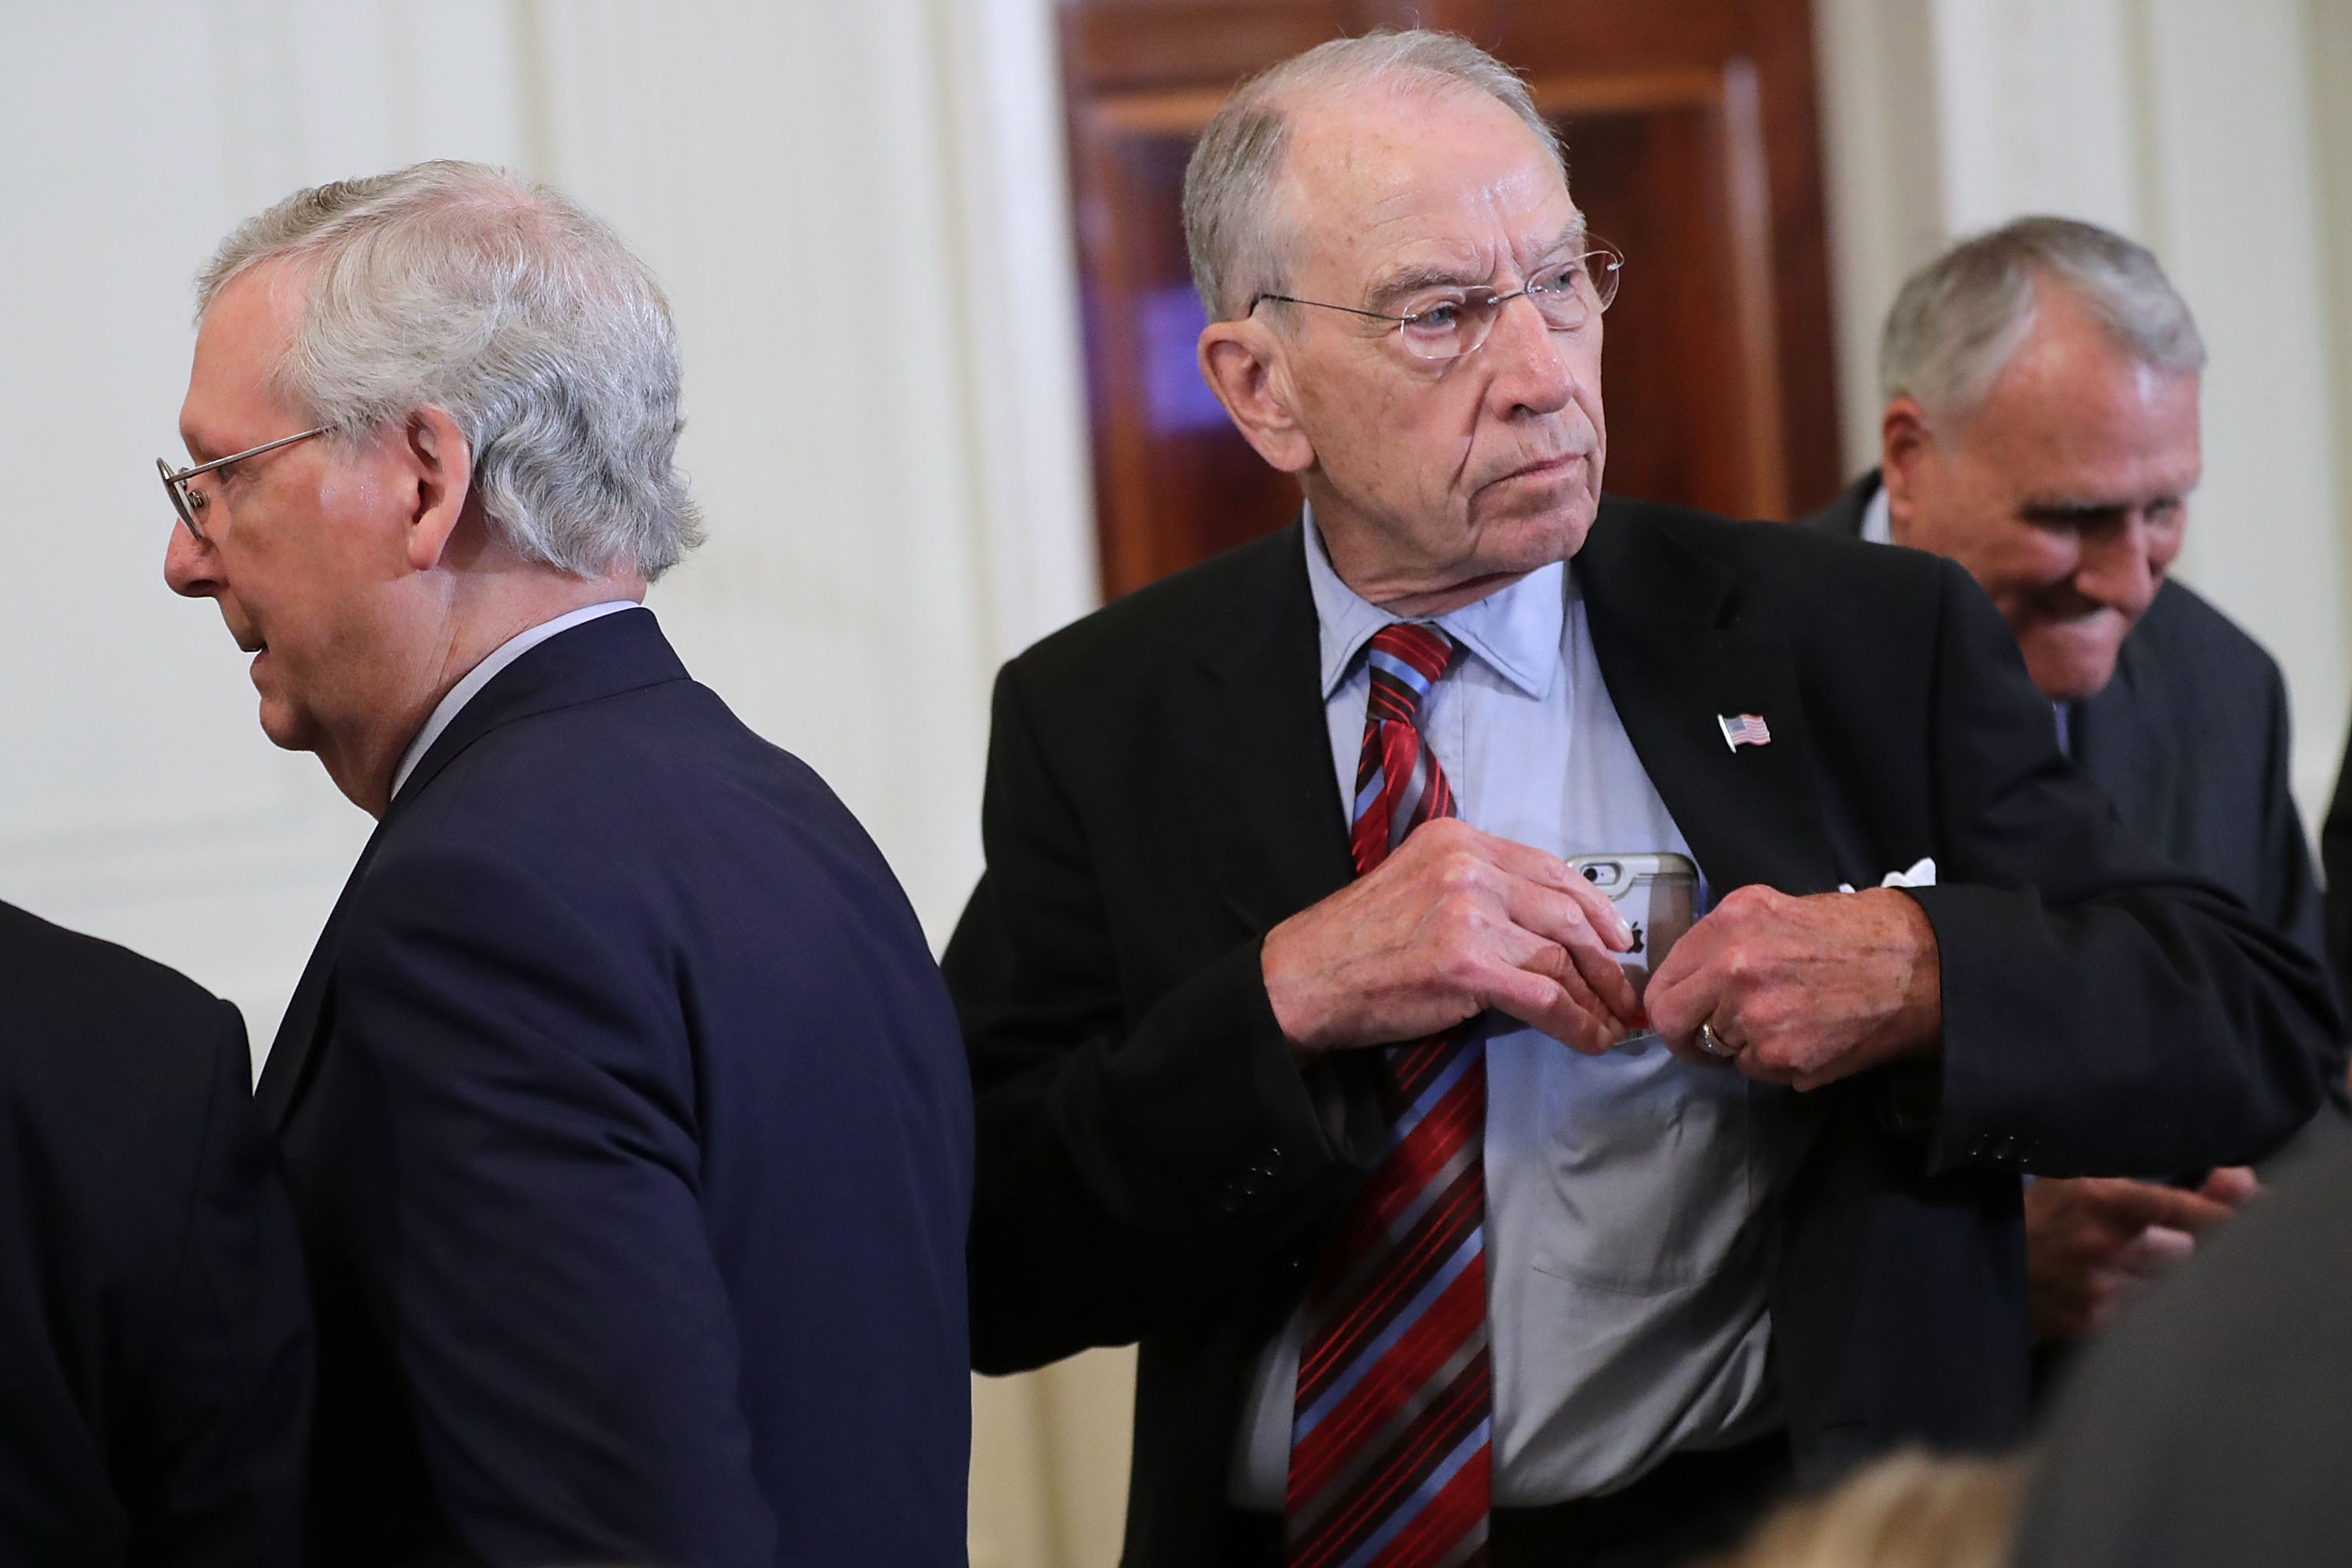 Senate Majority Leader Mitch McConnell and Senate Judiciary Committee Chairman Charles Grassley